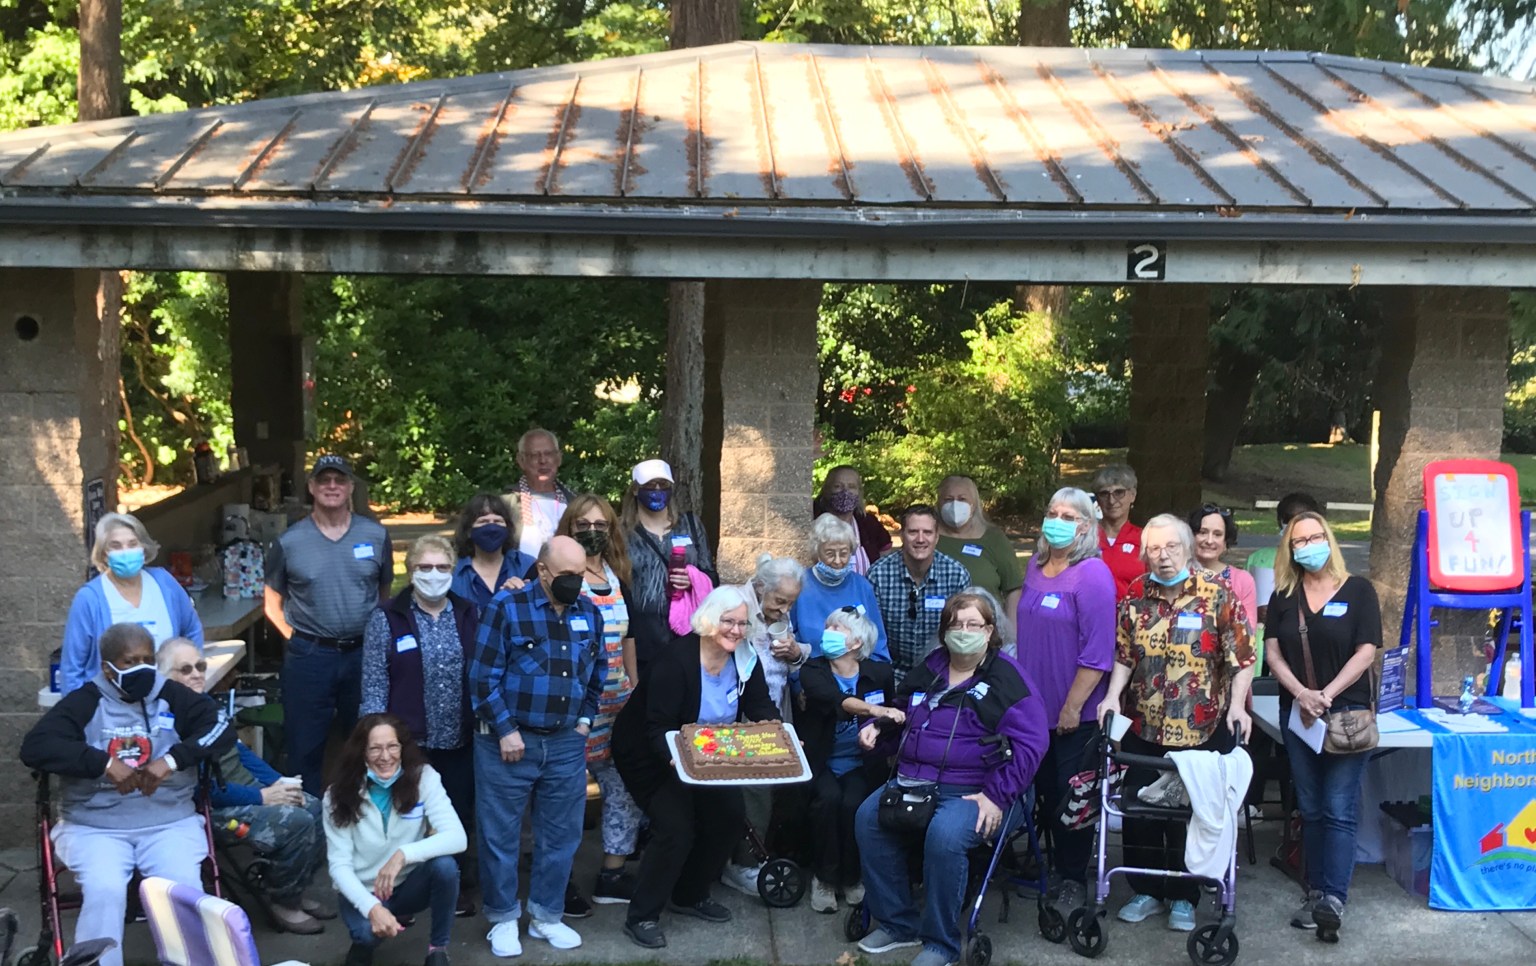 Northwest Neighbors Network members and volunteers participated in an ice cream social at a park to share time together and build community.